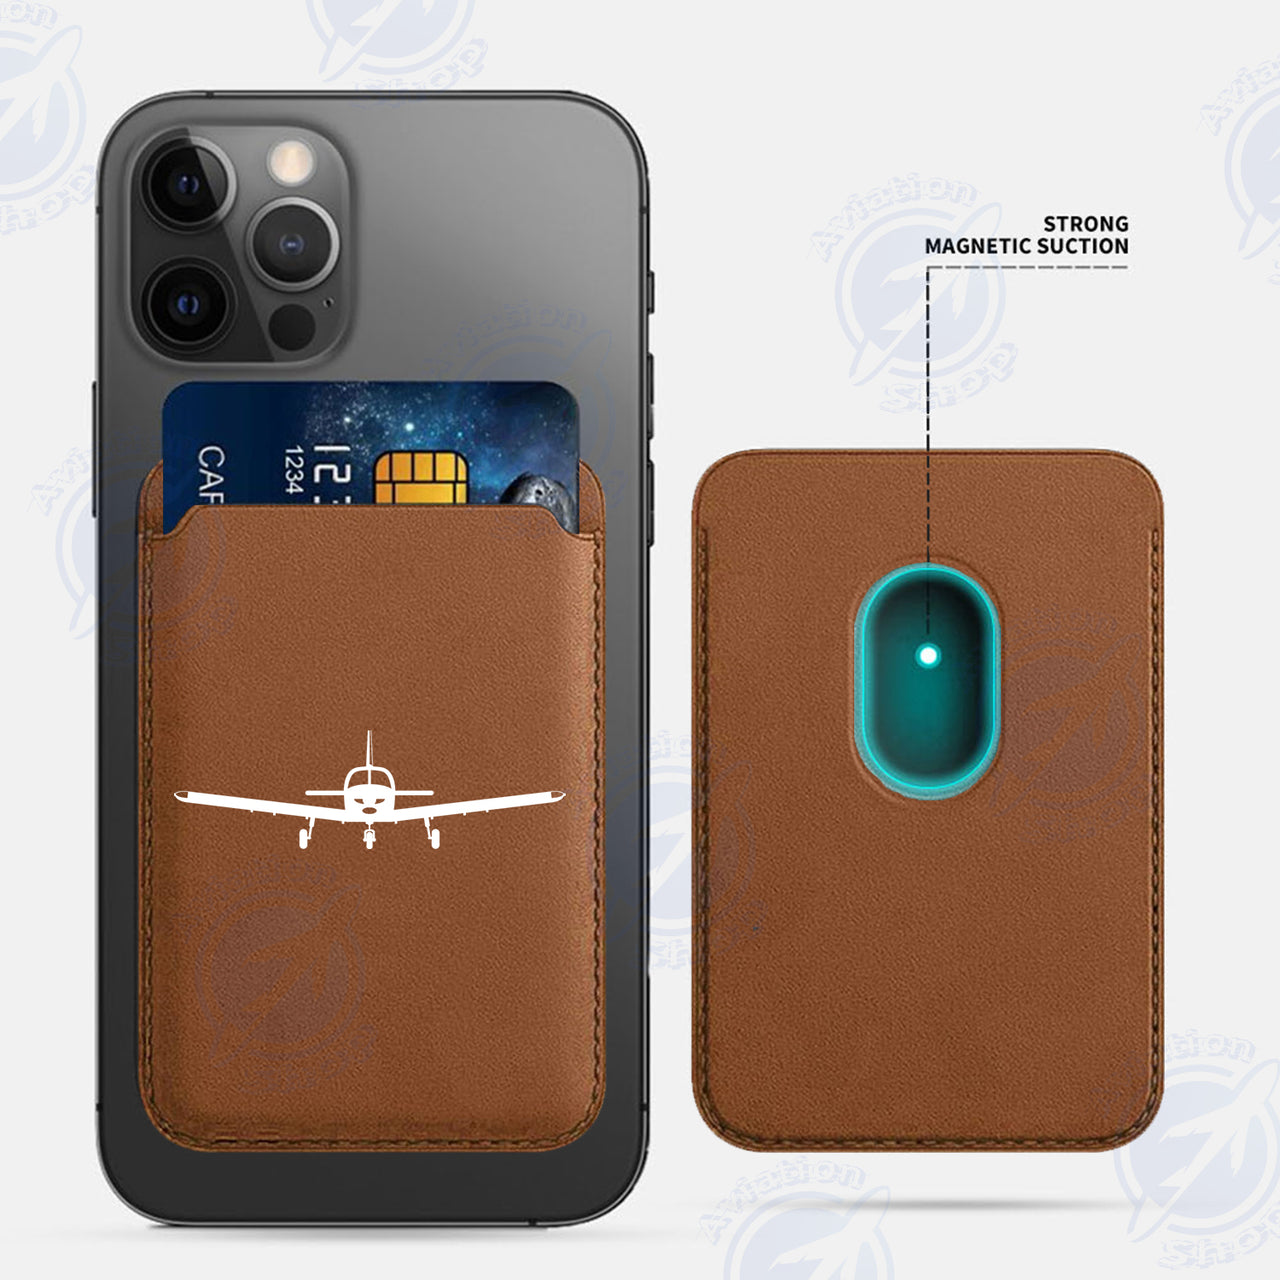 Piper PA28 Silhouette Plane iPhone Cases Magnetic Card Wallet